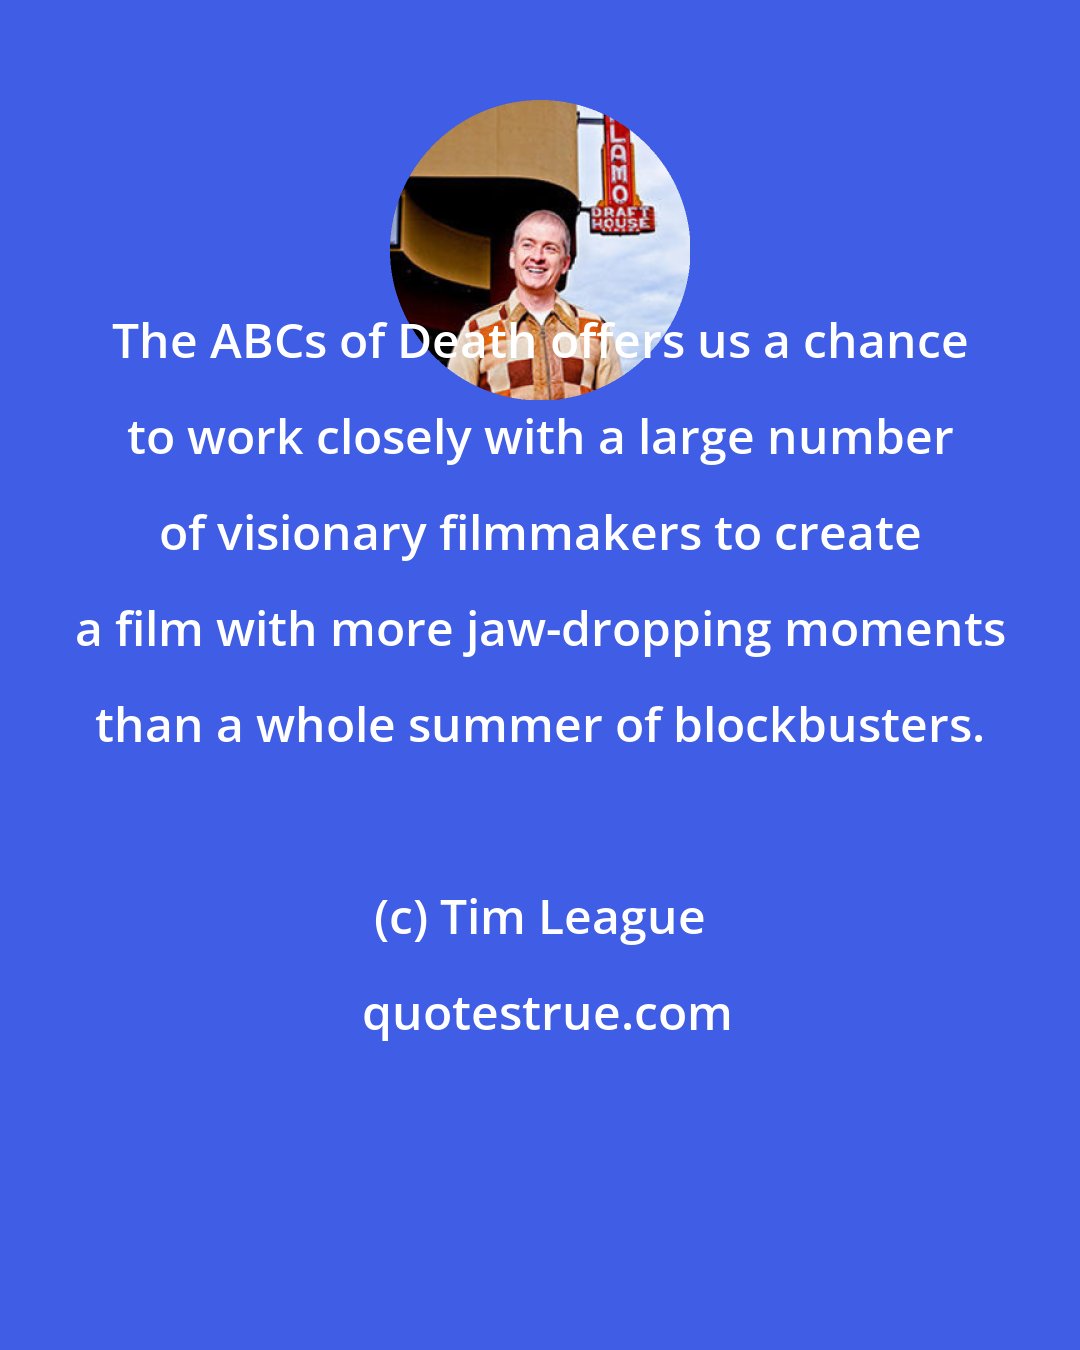 Tim League: The ABCs of Death offers us a chance to work closely with a large number of visionary filmmakers to create a film with more jaw-dropping moments than a whole summer of blockbusters.